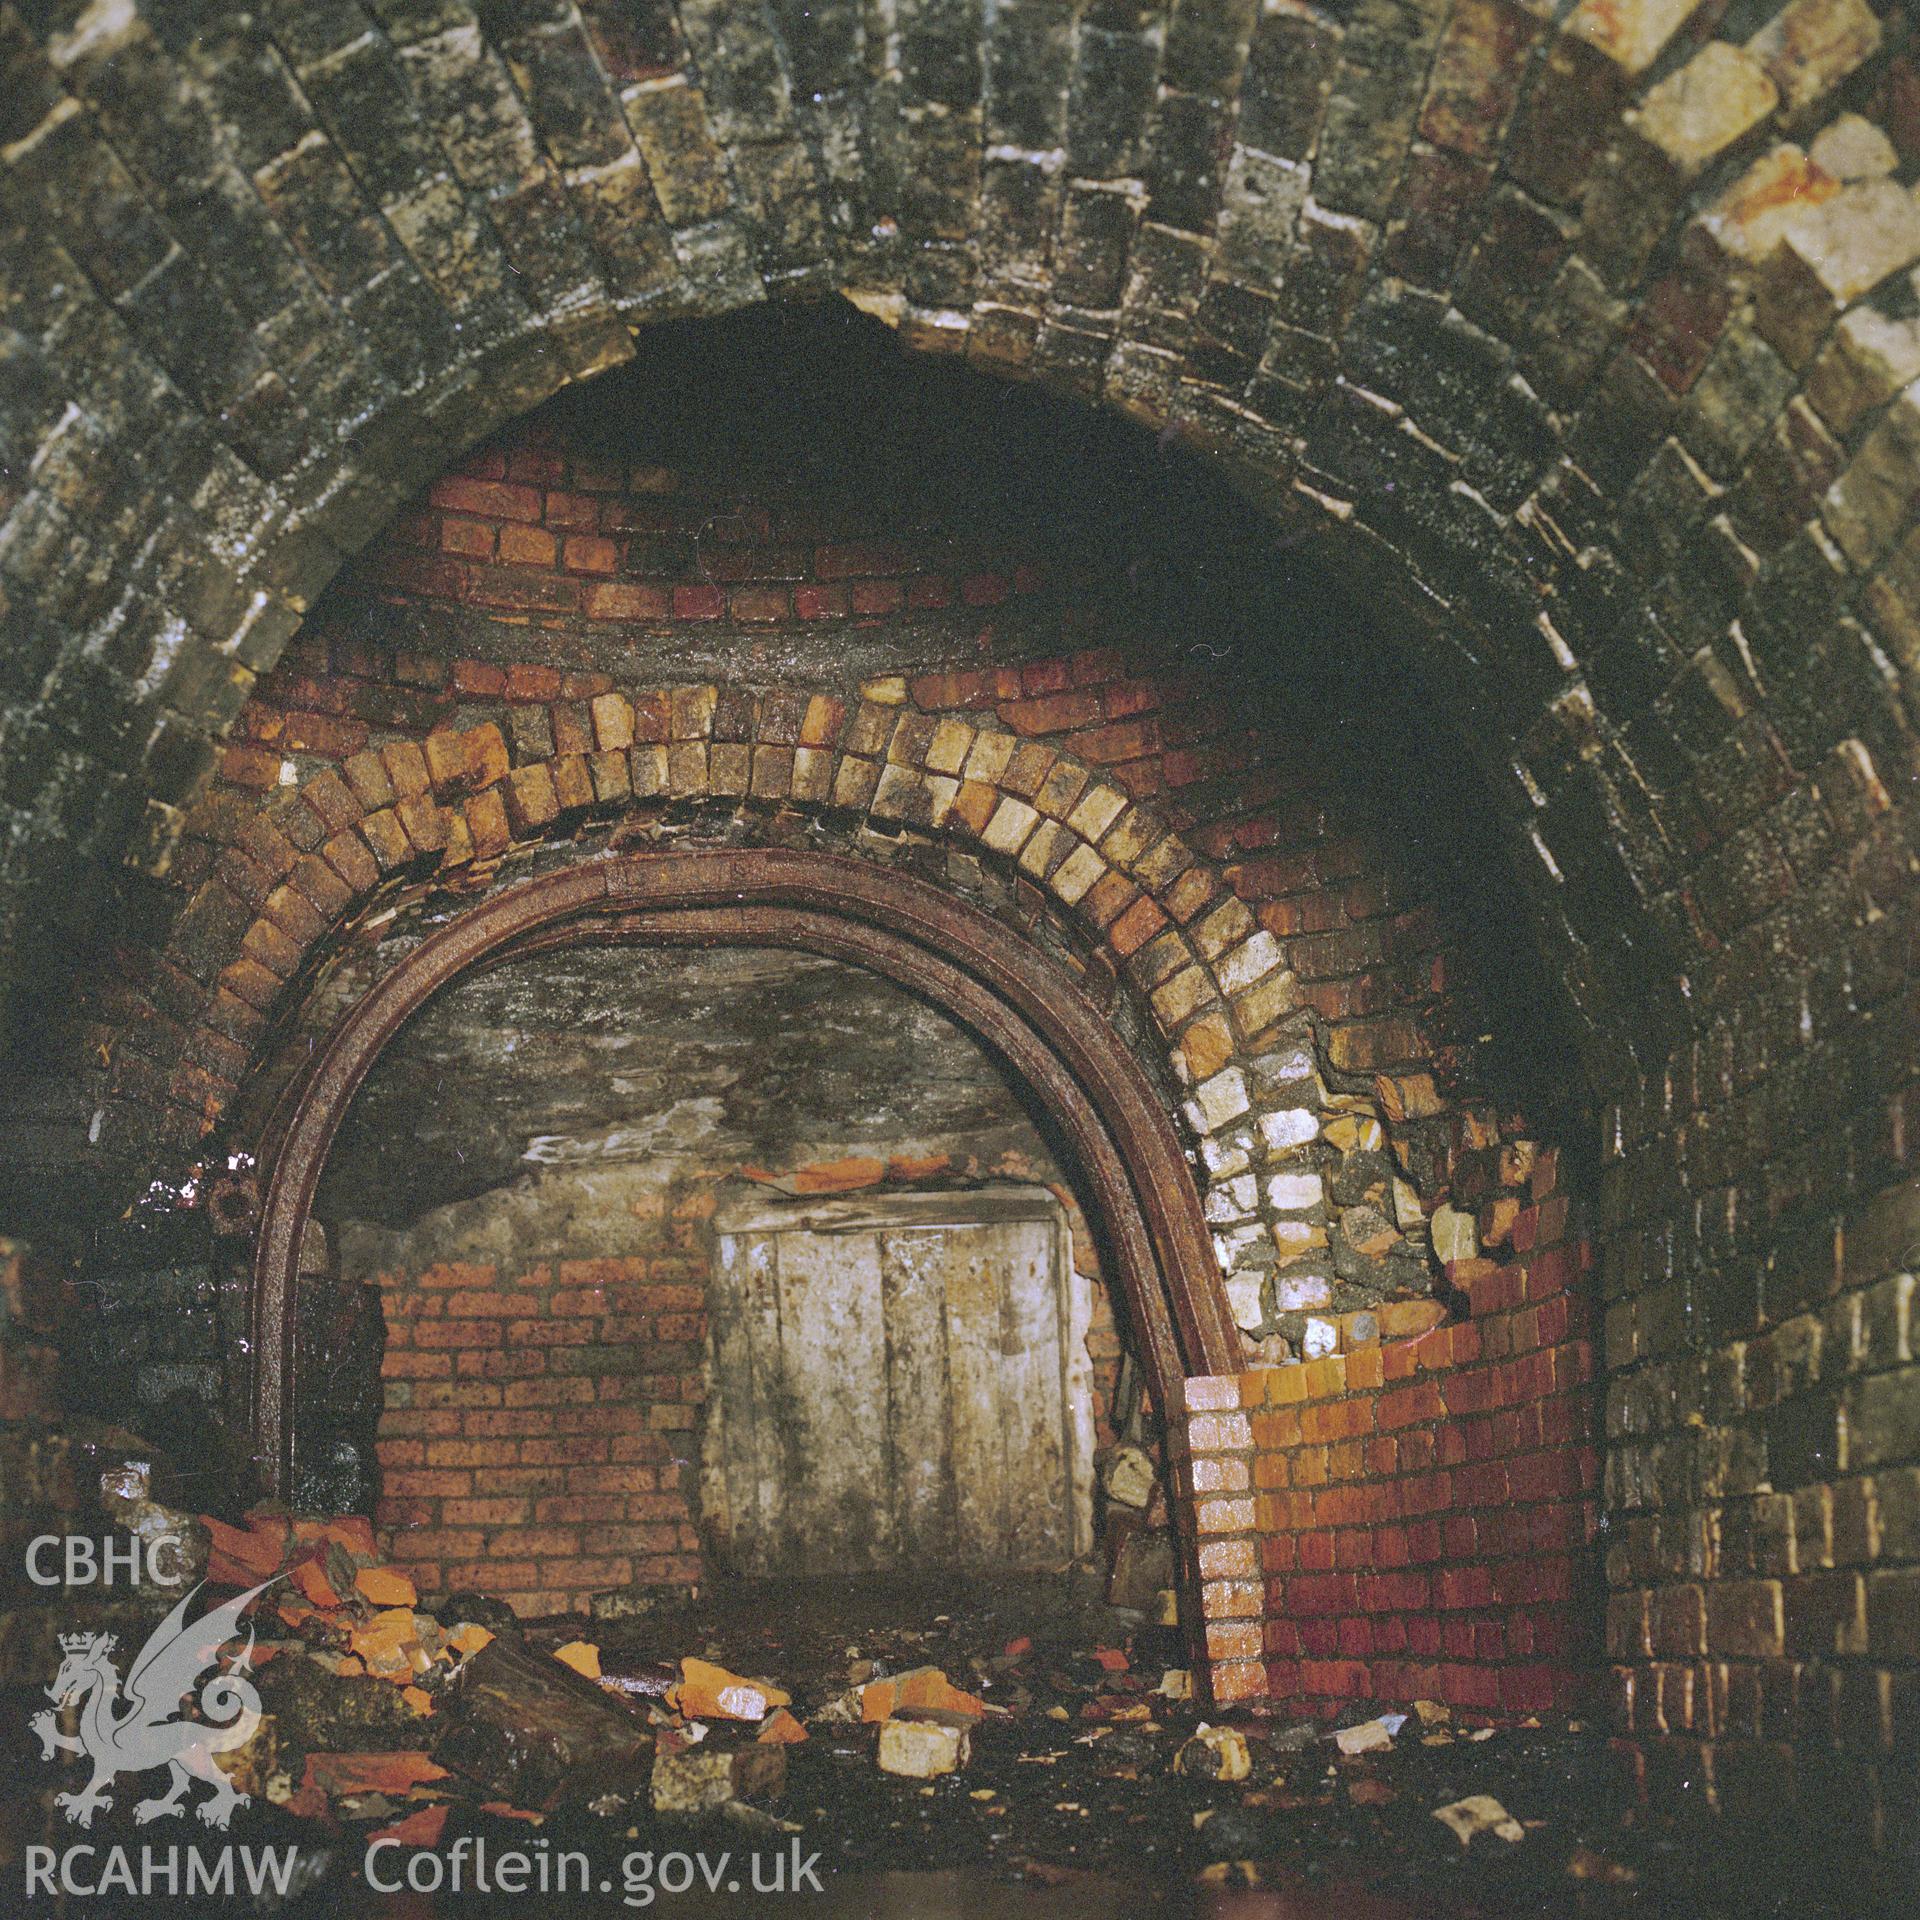 Digital copy of an acetate negative showing bottom of Coity Pit shaft at Big Pit, from the John Cornwell Collection.